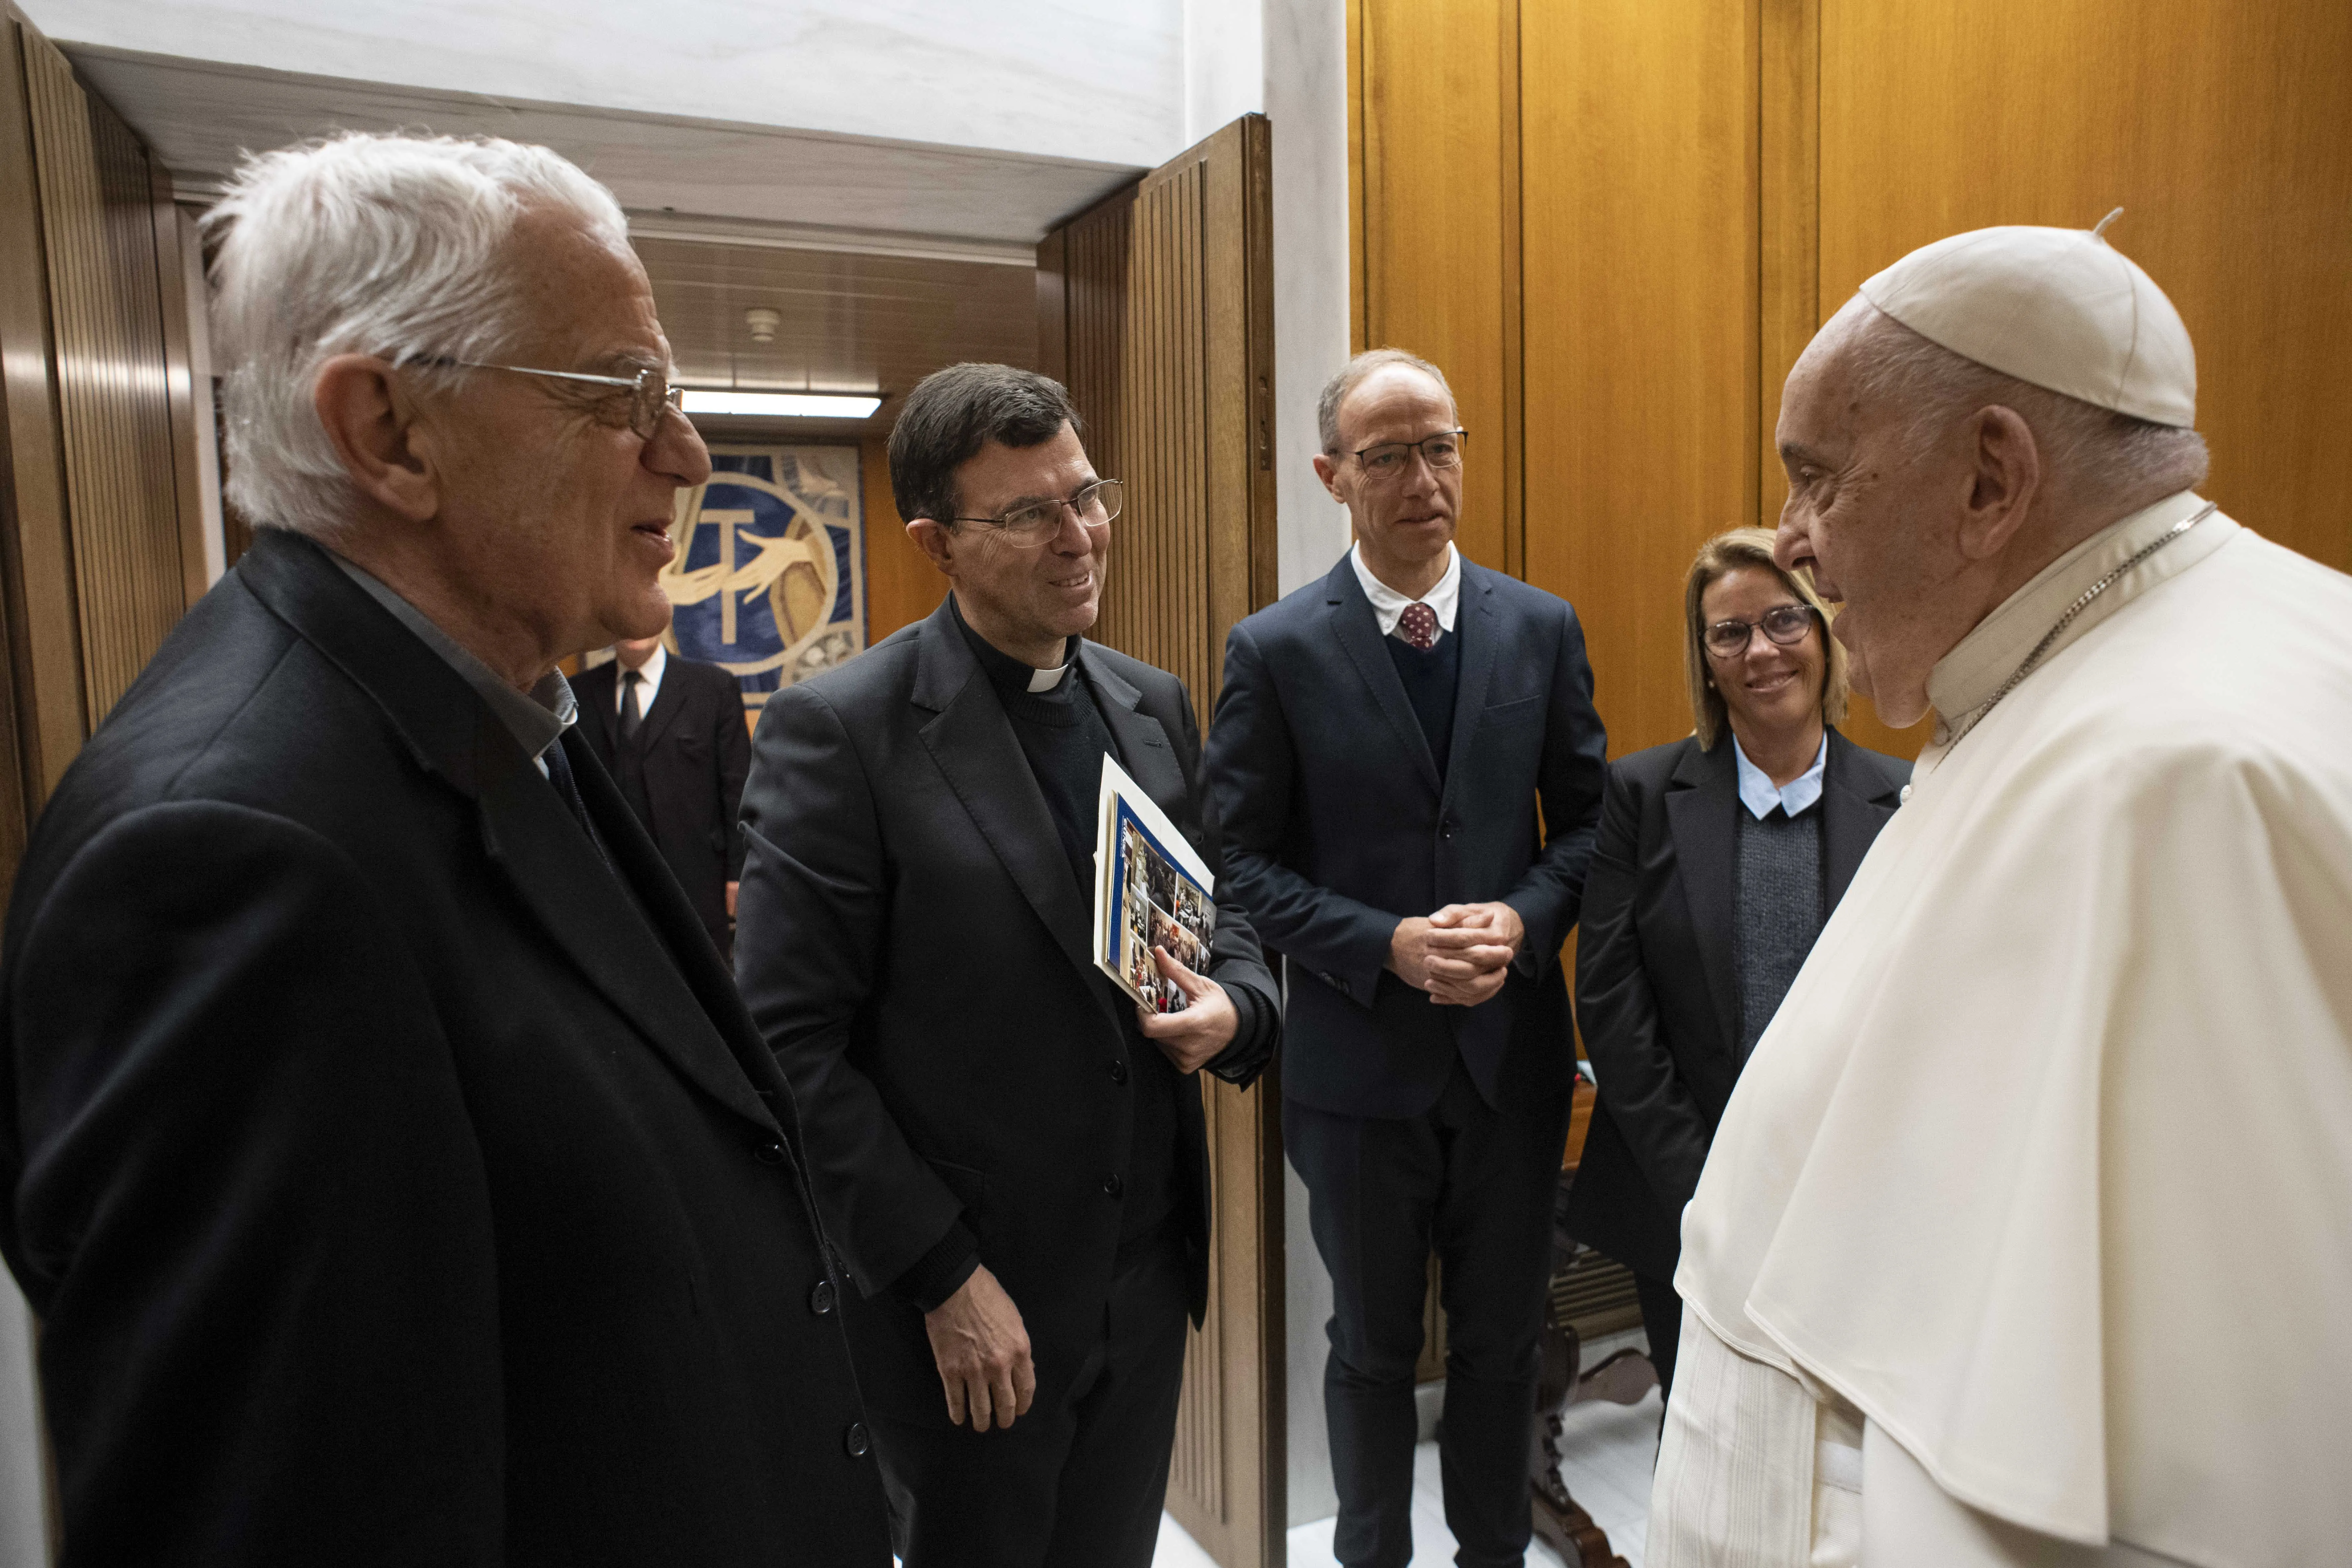 Pope Francis meets with Father Federico Lombardi, president of the Ratzinger Foundation and Vatican spokesman during Pope Benedict XVI’s pontificate (left), and the 2023 Ratzinger Prize recipients Father Pablo Blanco Sarto (center) and Professor Francesc Torralba (right) at the Vatican on Nov. 30, 2023.?w=200&h=150